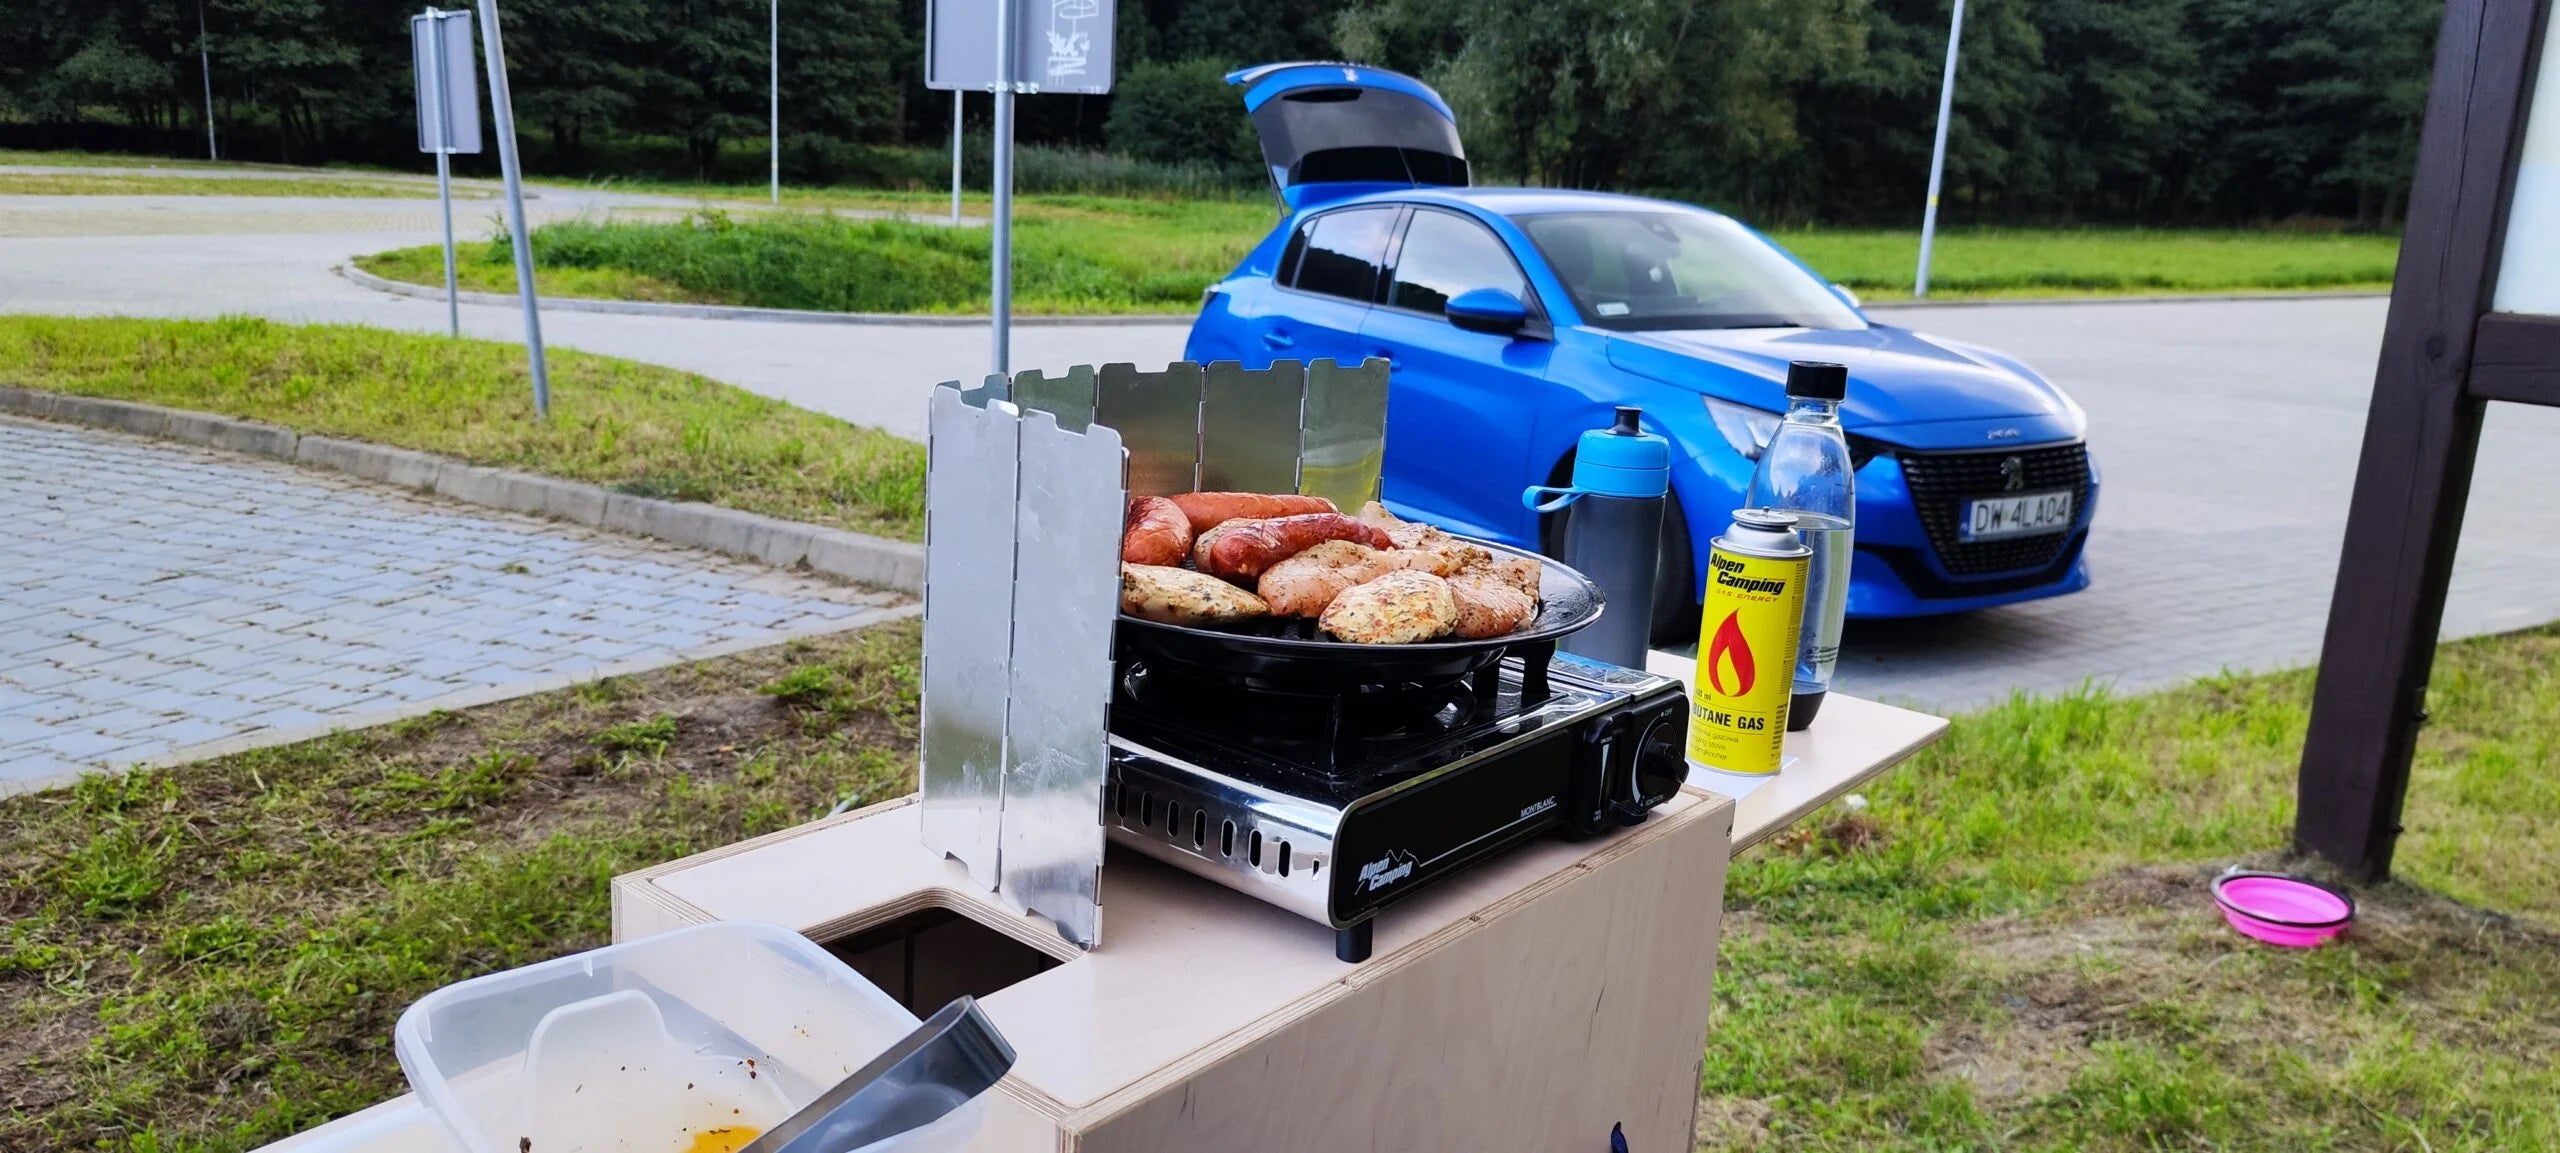 Gas burner Grill plate - Alpen Camping